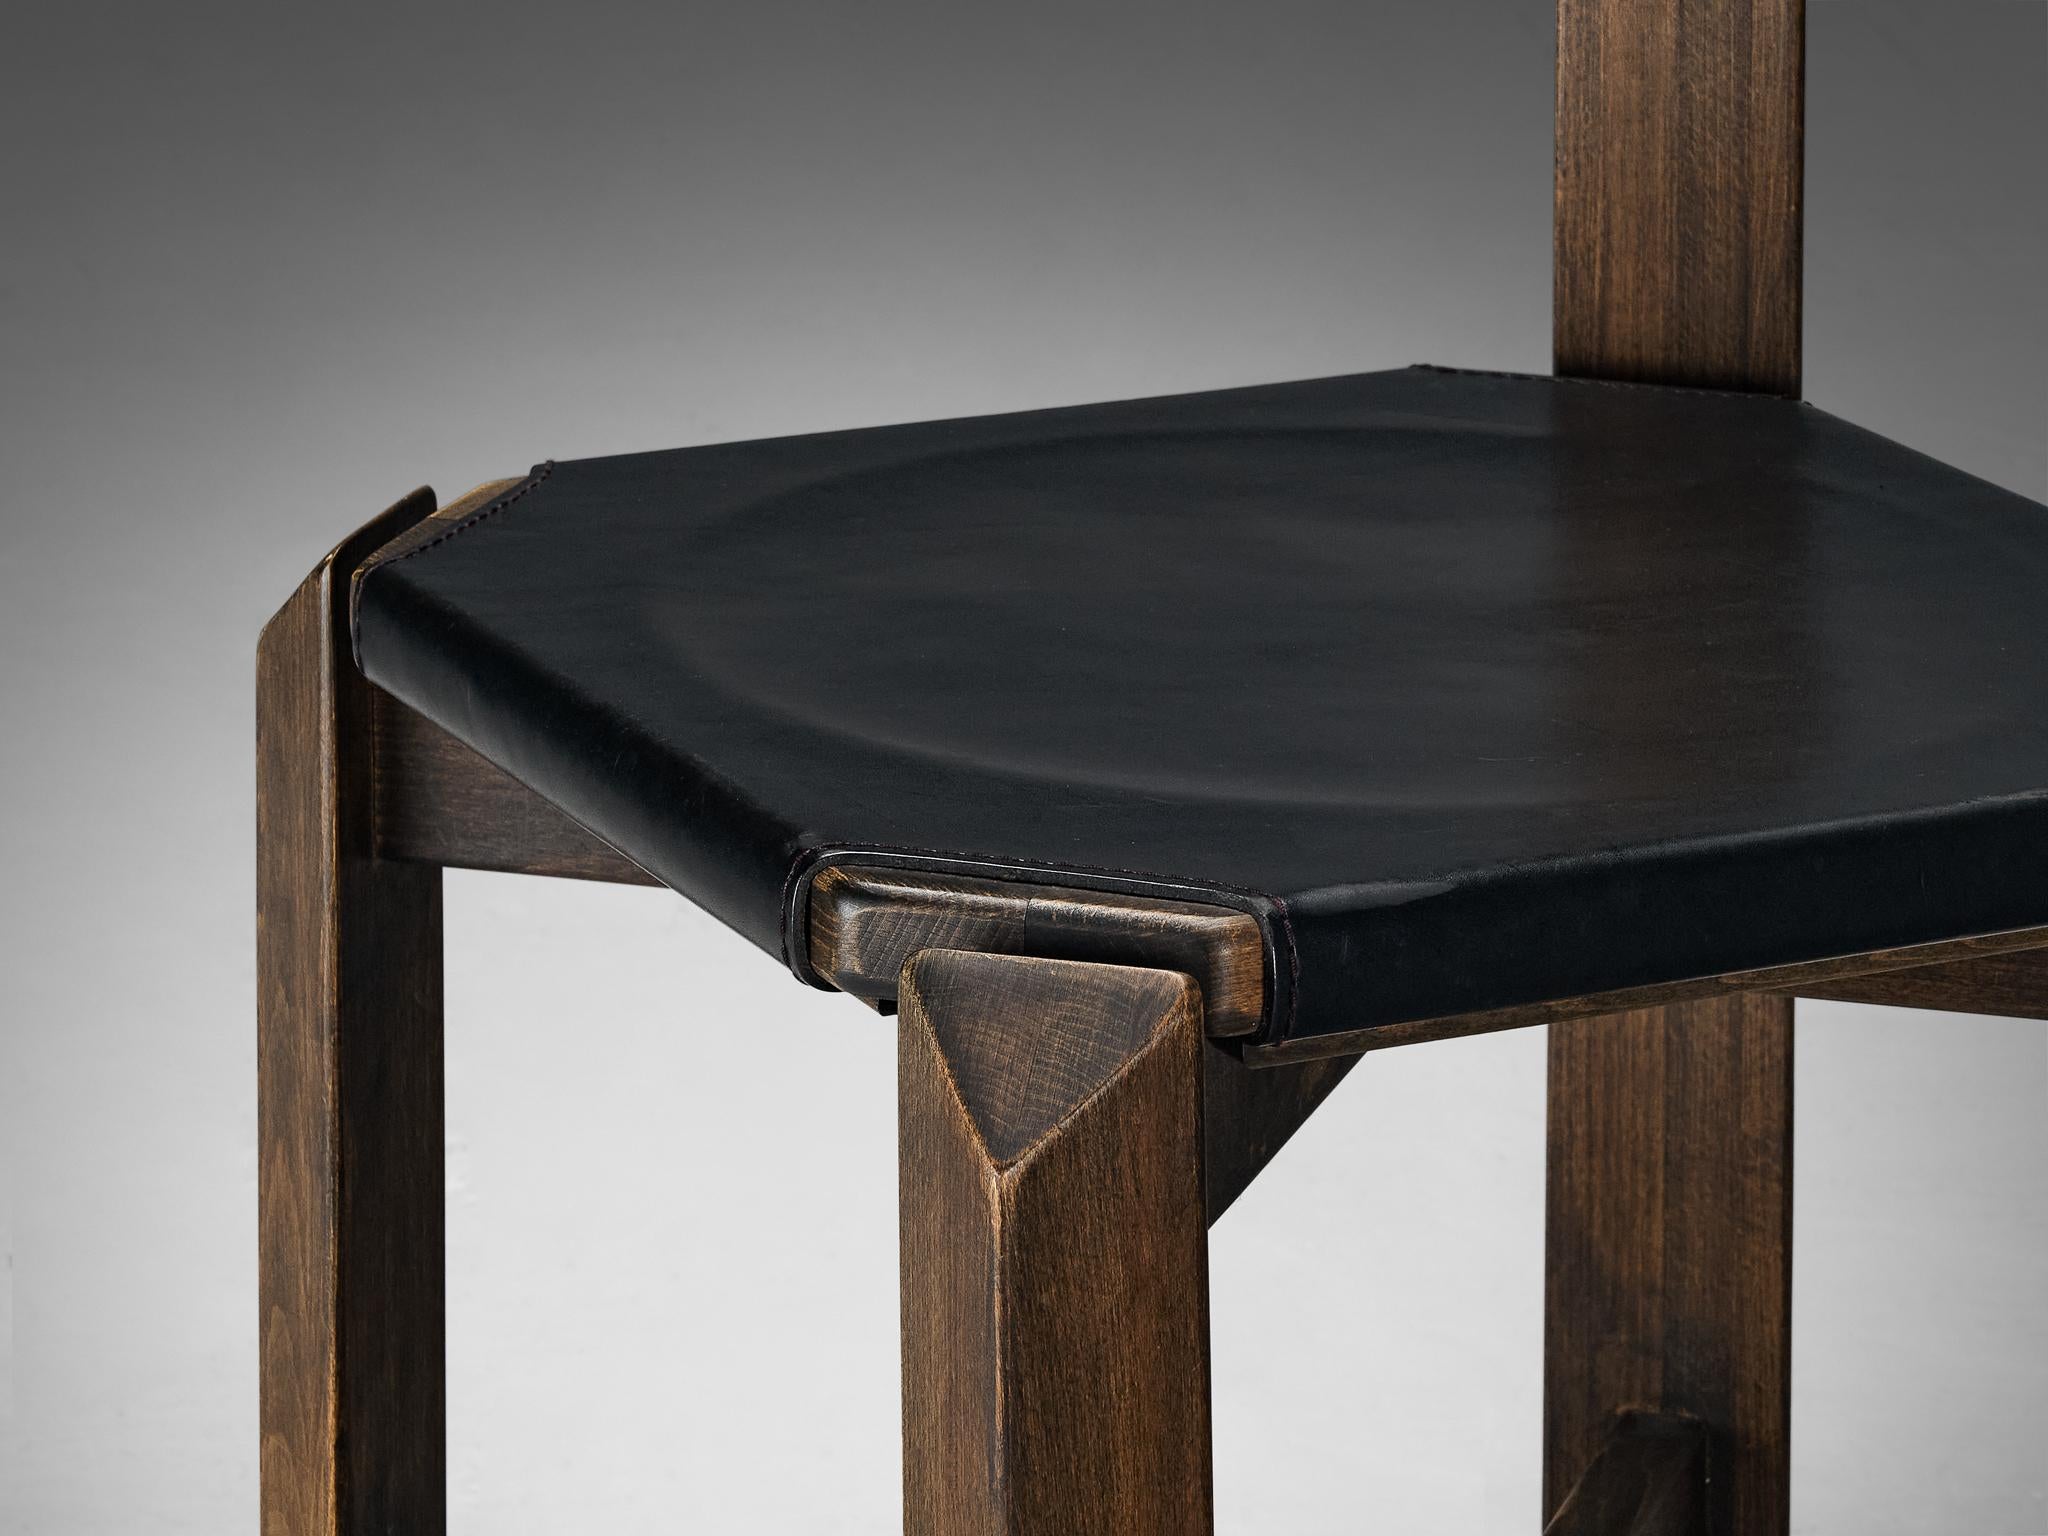 Sturdy Dining Chair in Black Leather and Wood